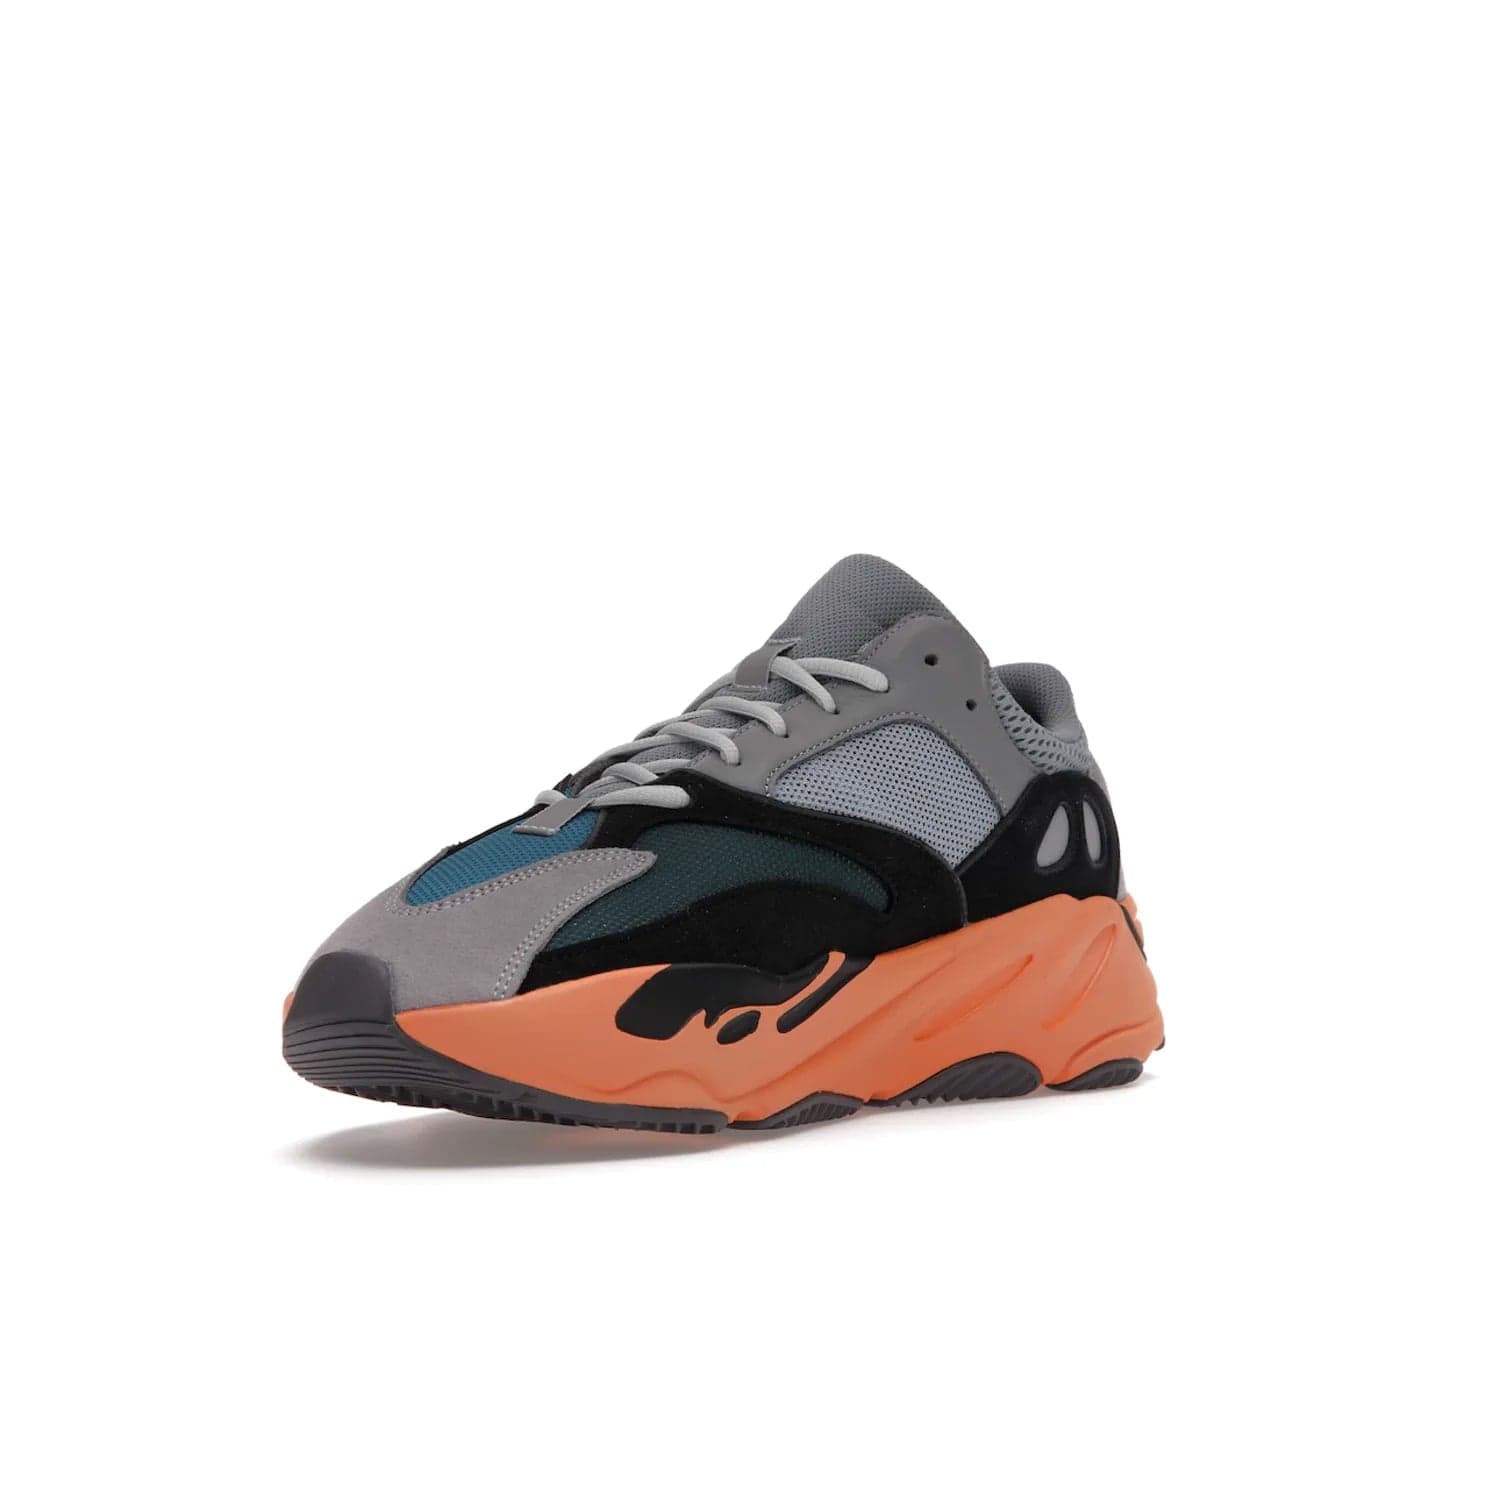 adidas Yeezy Boost 700 Wash Orange - Image 14 - Only at www.BallersClubKickz.com - Introducing the adidas Yeezy Boost 700 Wash Orange. Unique grey leather, suede, mesh upper and teal panels with a chunky Wash Orange Boost midsole. Release October 2021, make a statement today!